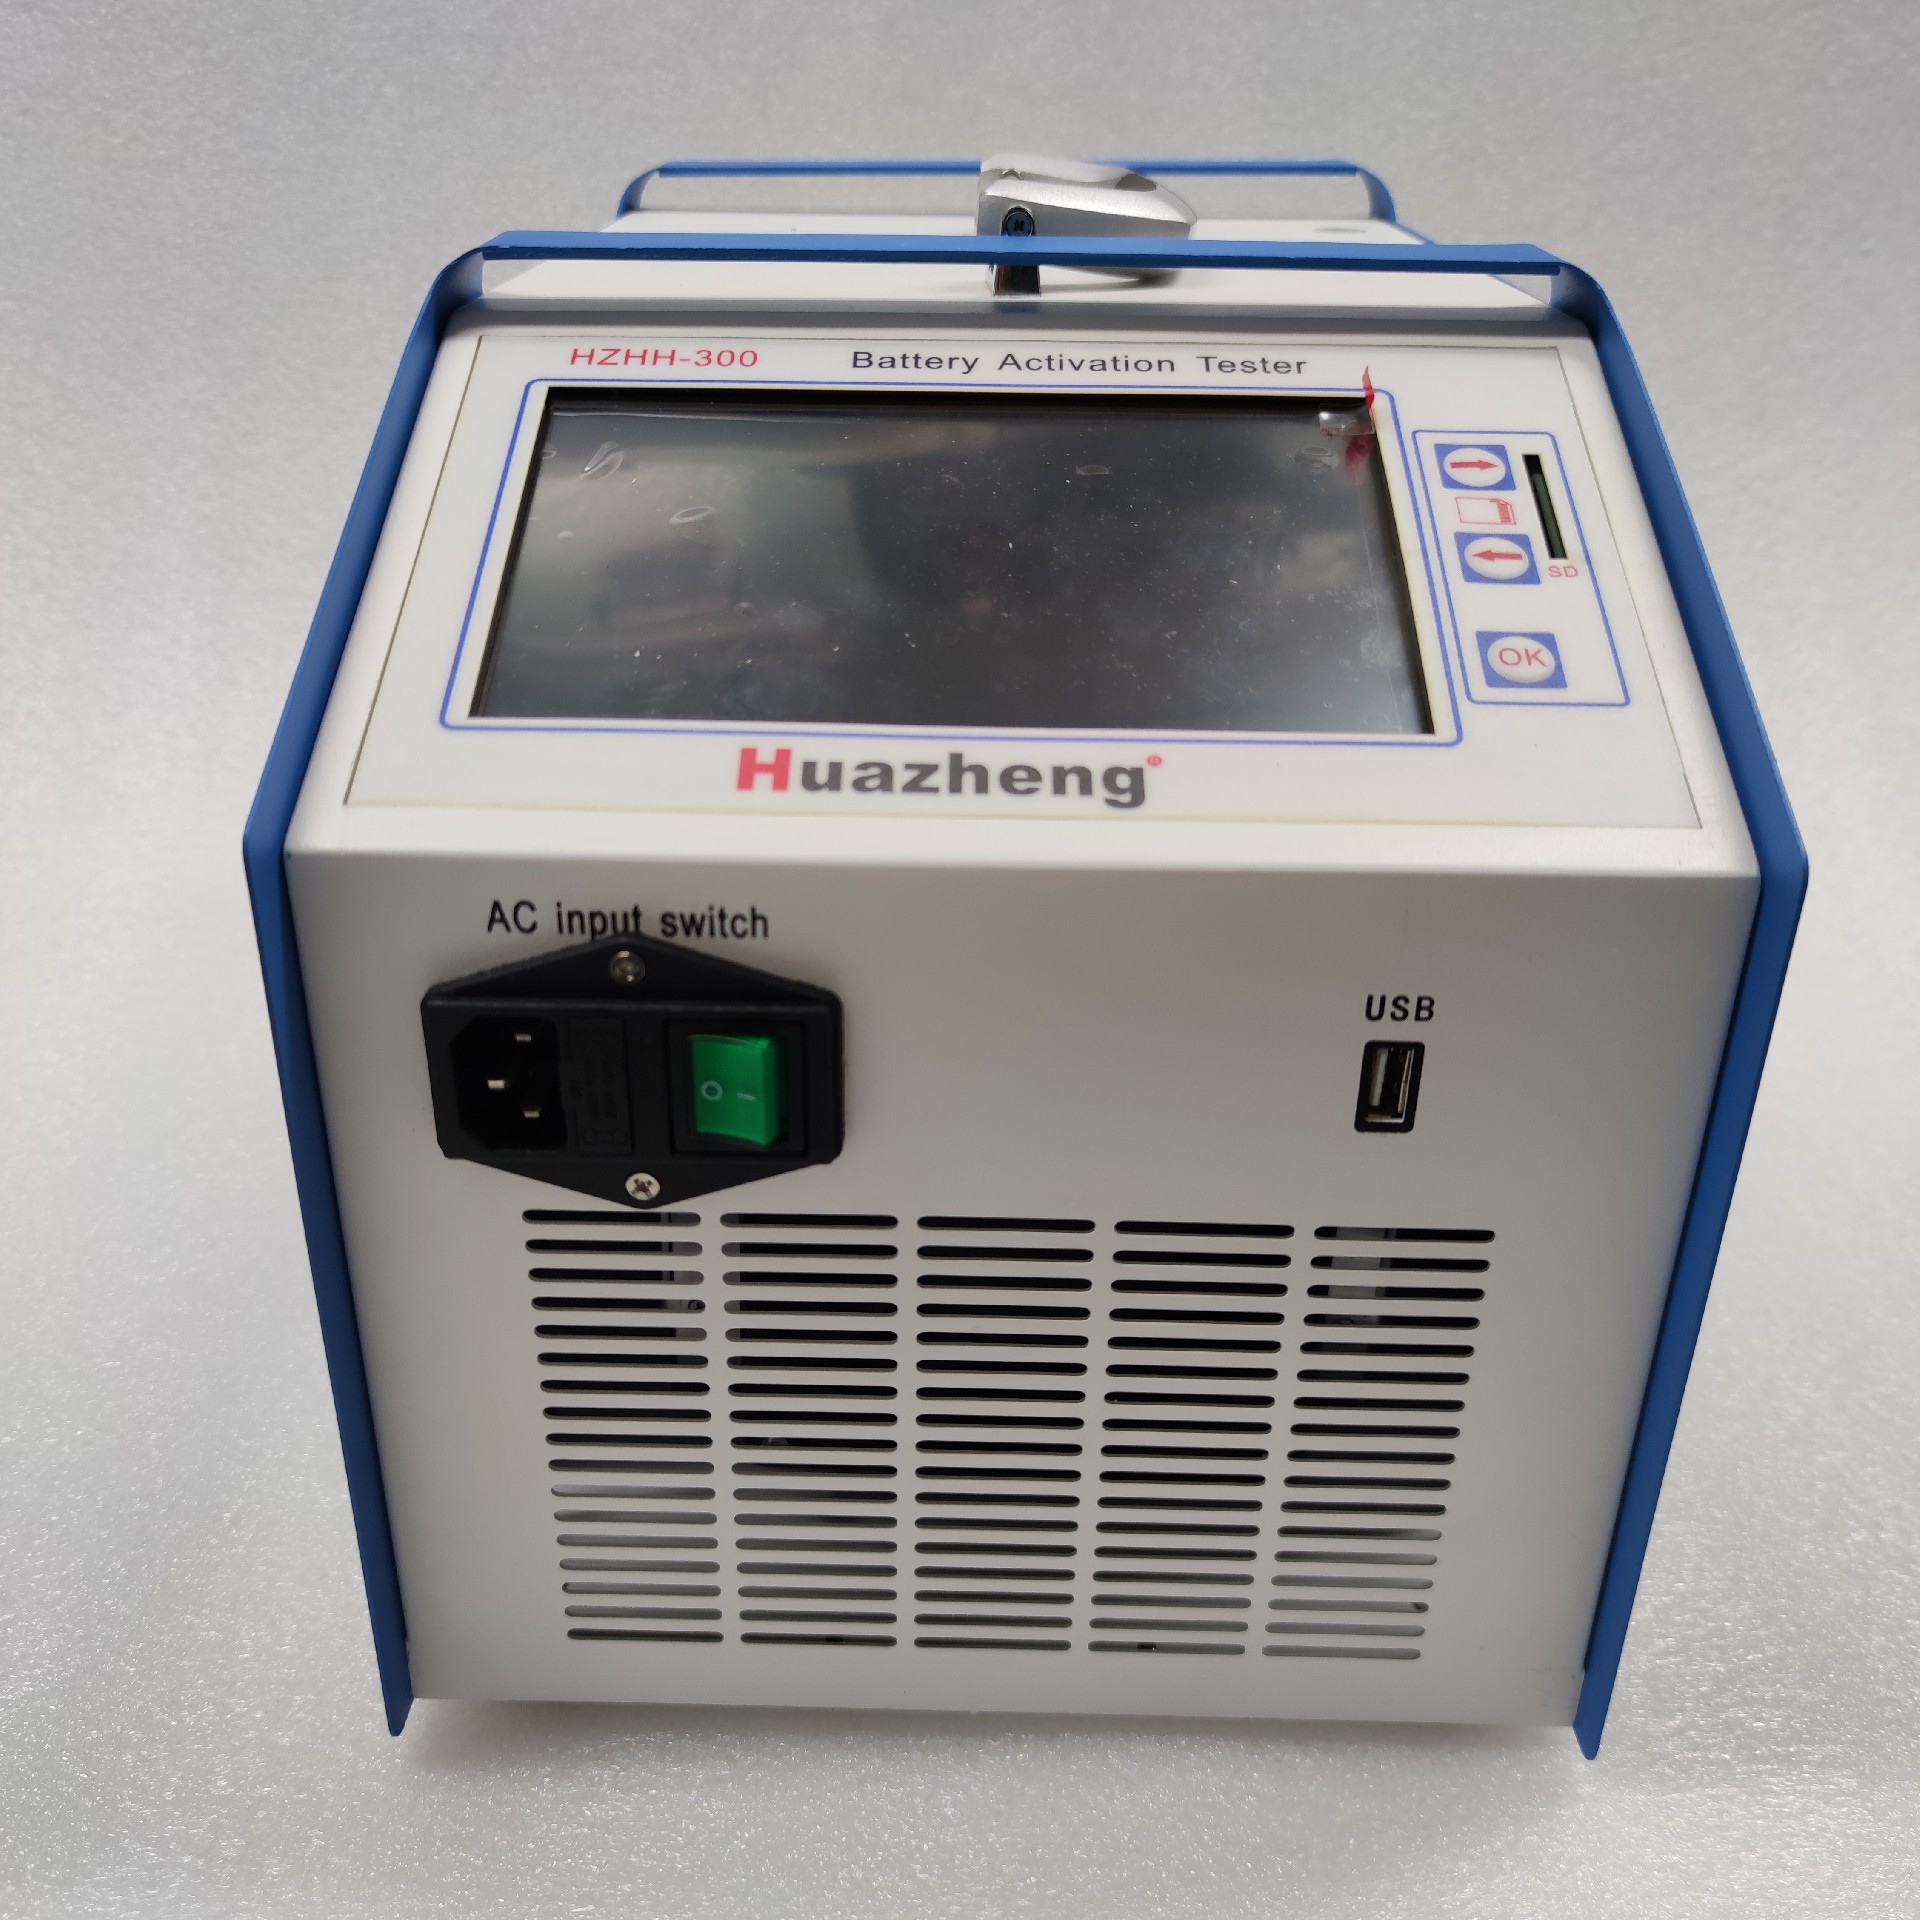 HZHH-300 Battery Activation Tester